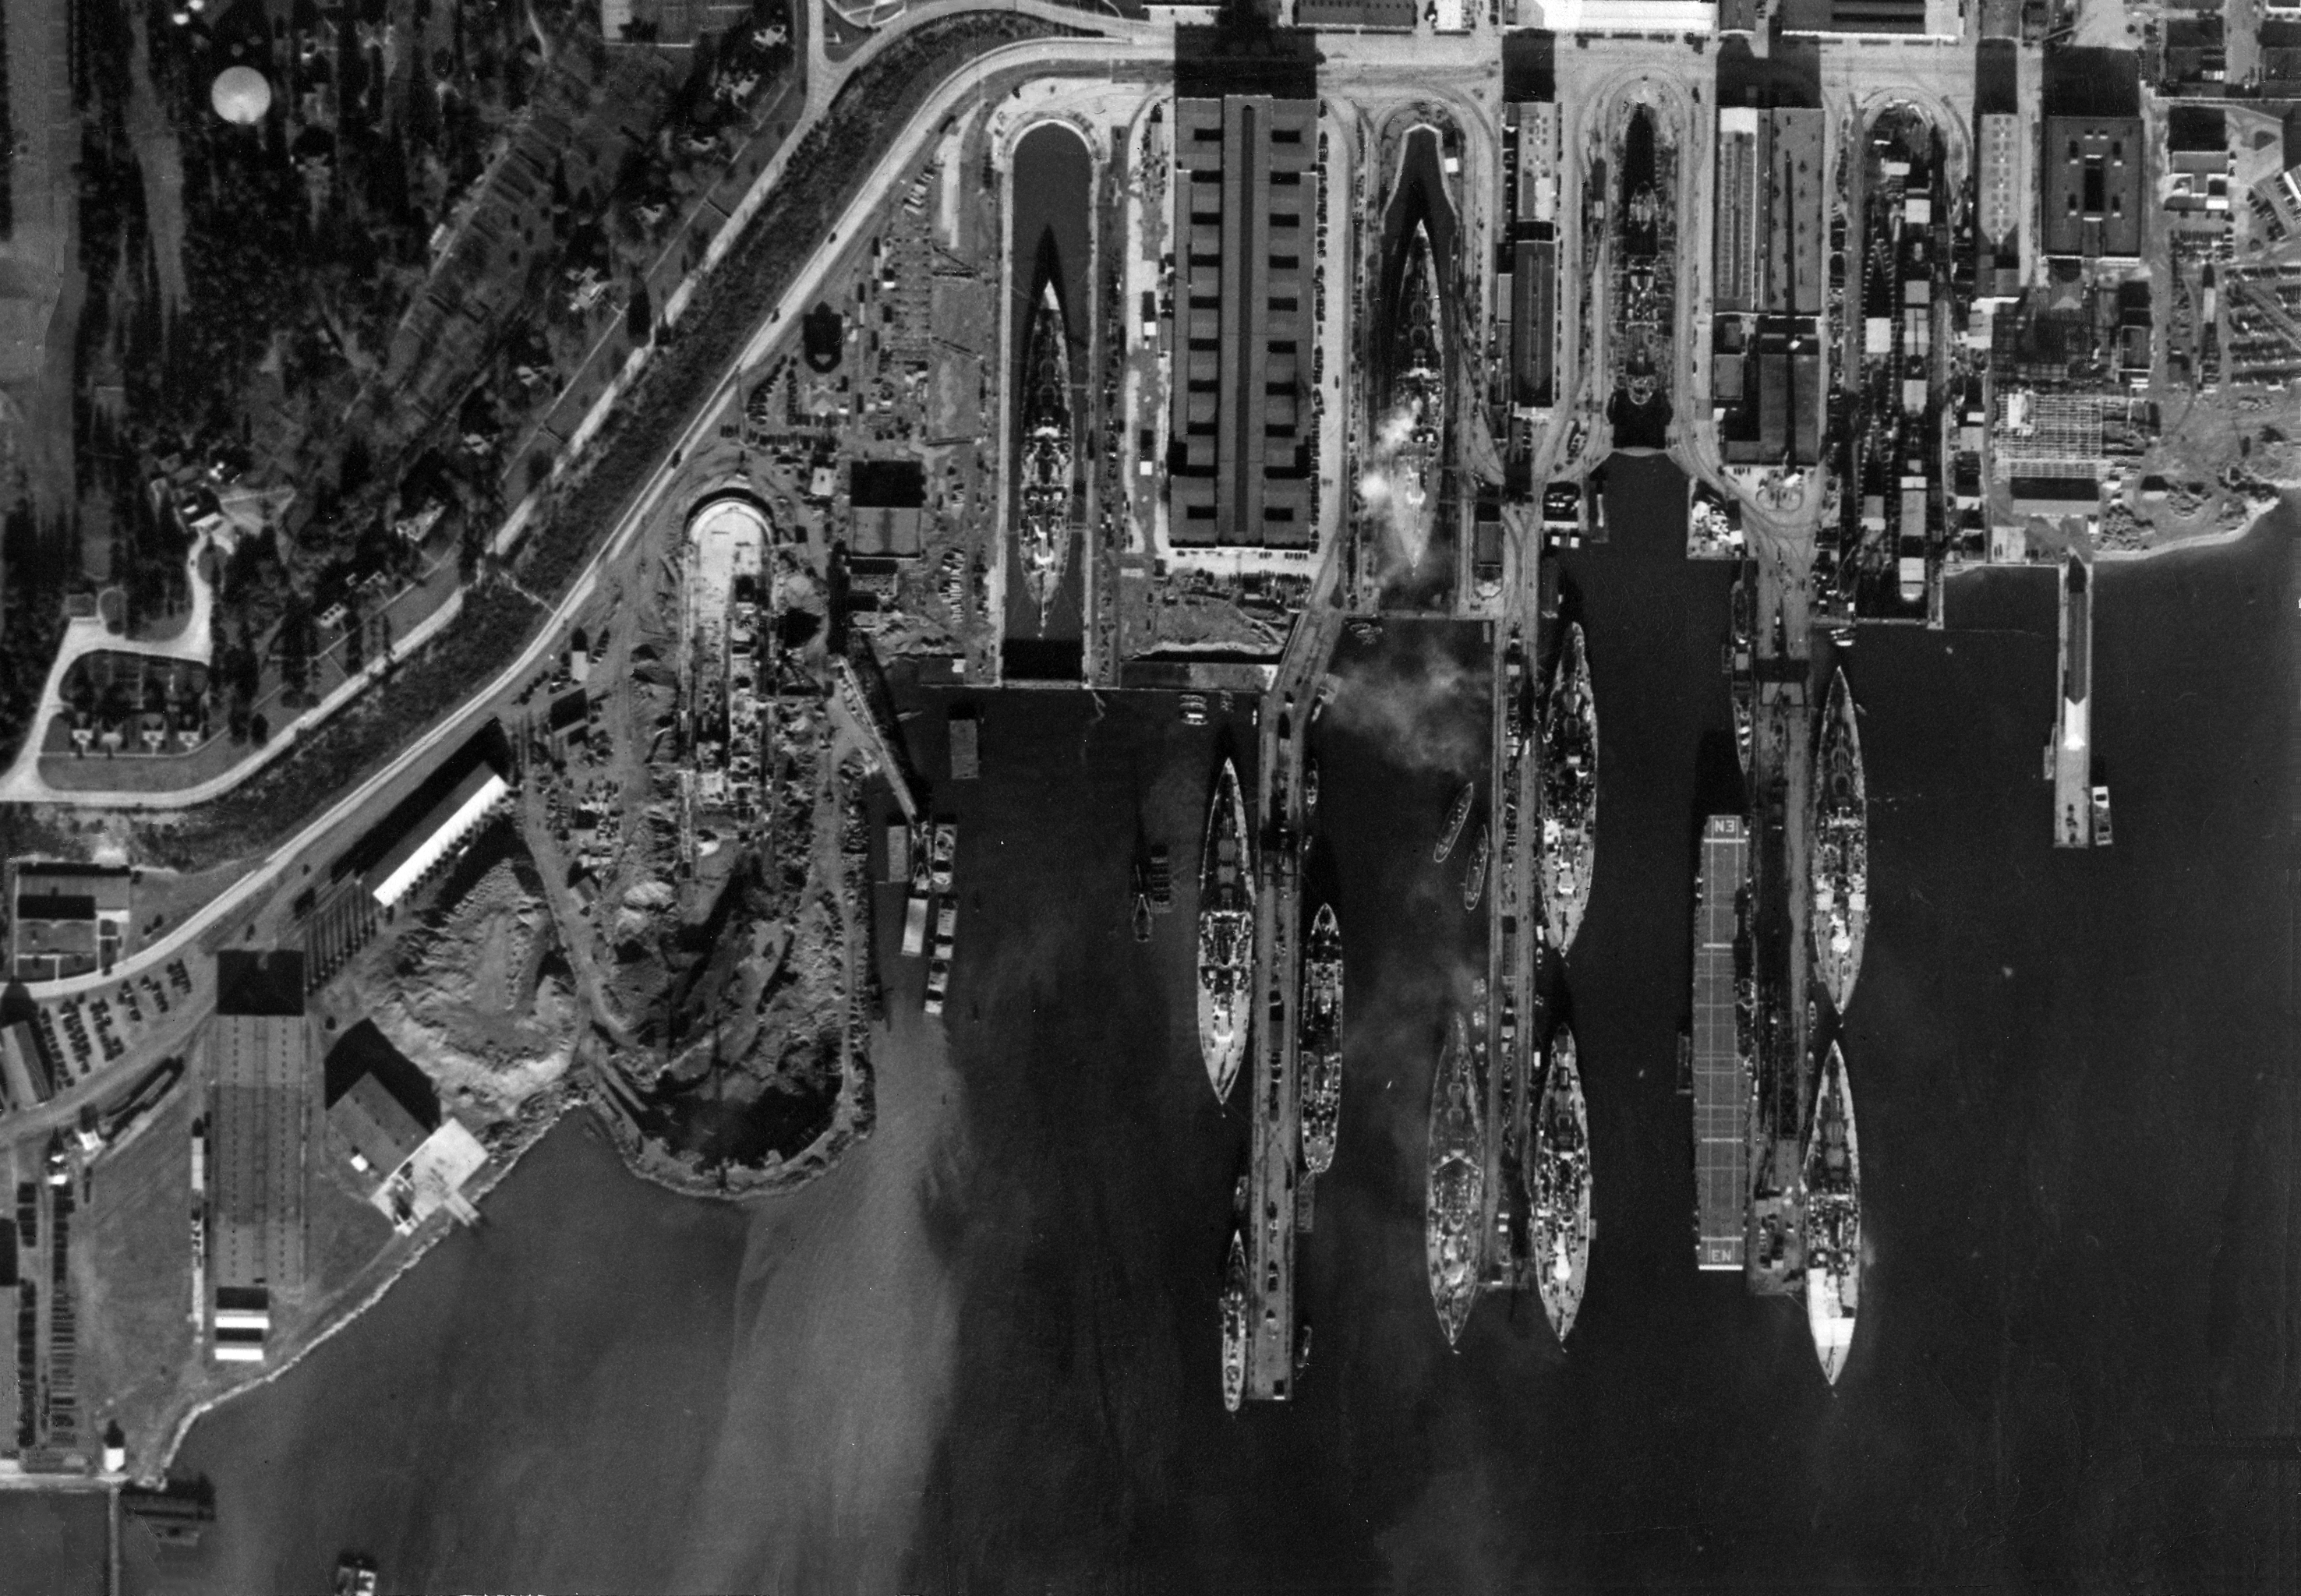 Straight down aerial view of the piers and drydocks at the Puget Sound Naval Shipyard, Bremerton, Washington, United States full of battleships and one carrier, USS Enterprise, 1940.